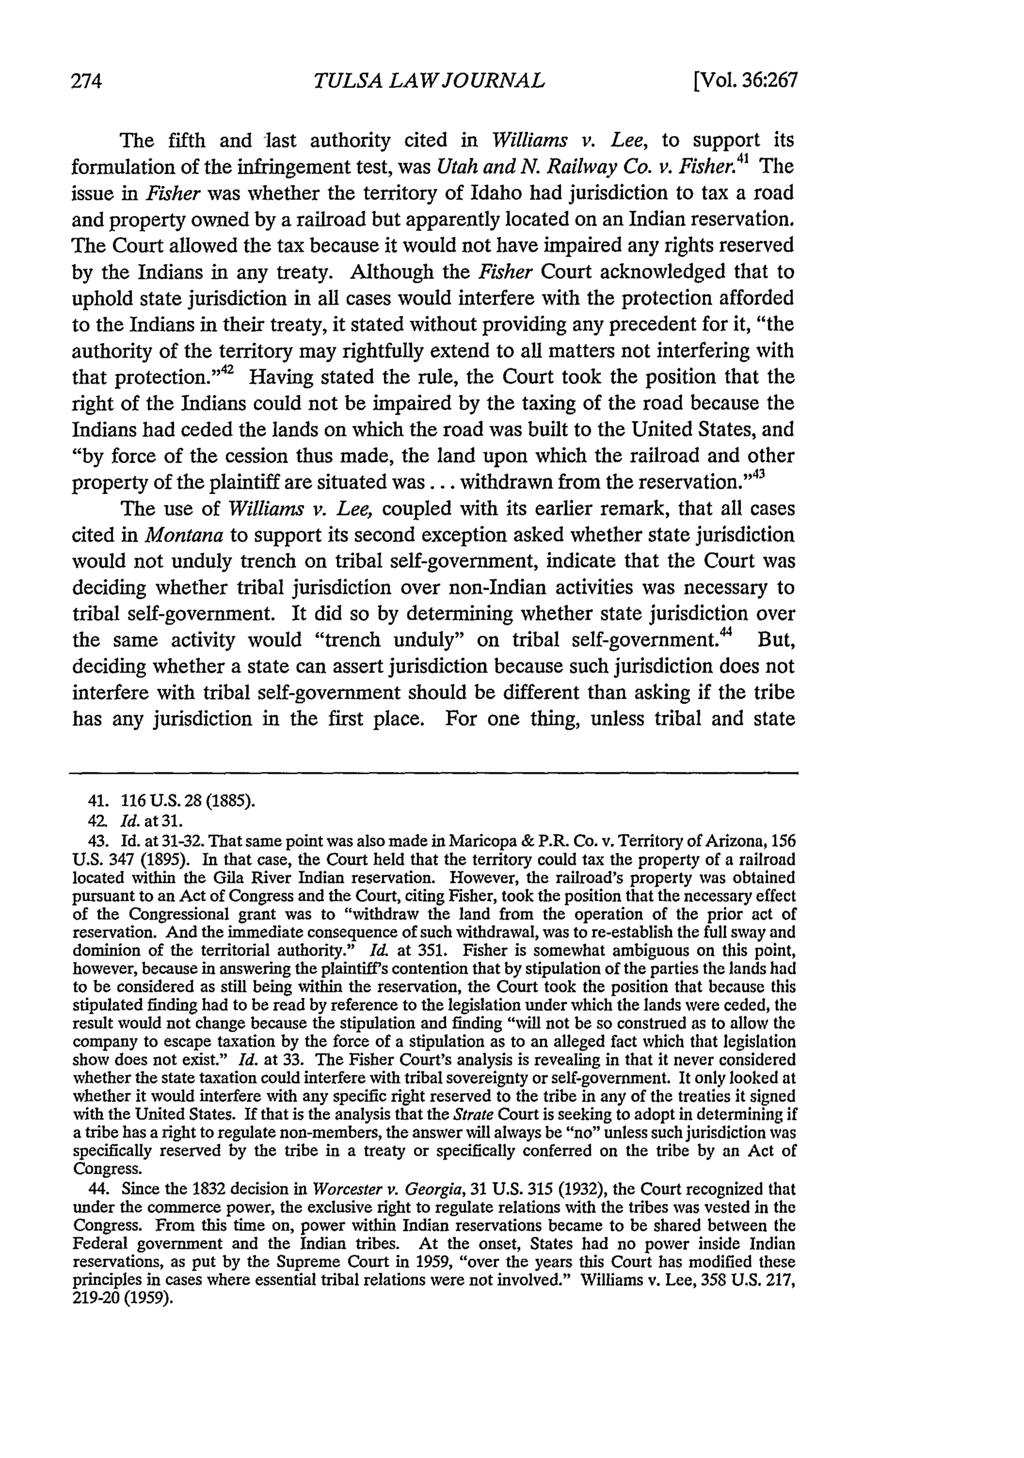 Tulsa Law Review, Vol. 36 [2000], Iss. 2, Art. 2 TULSA LAW JOURNAL [Vol. 36:267 The fifth and last authority cited in Williams v.